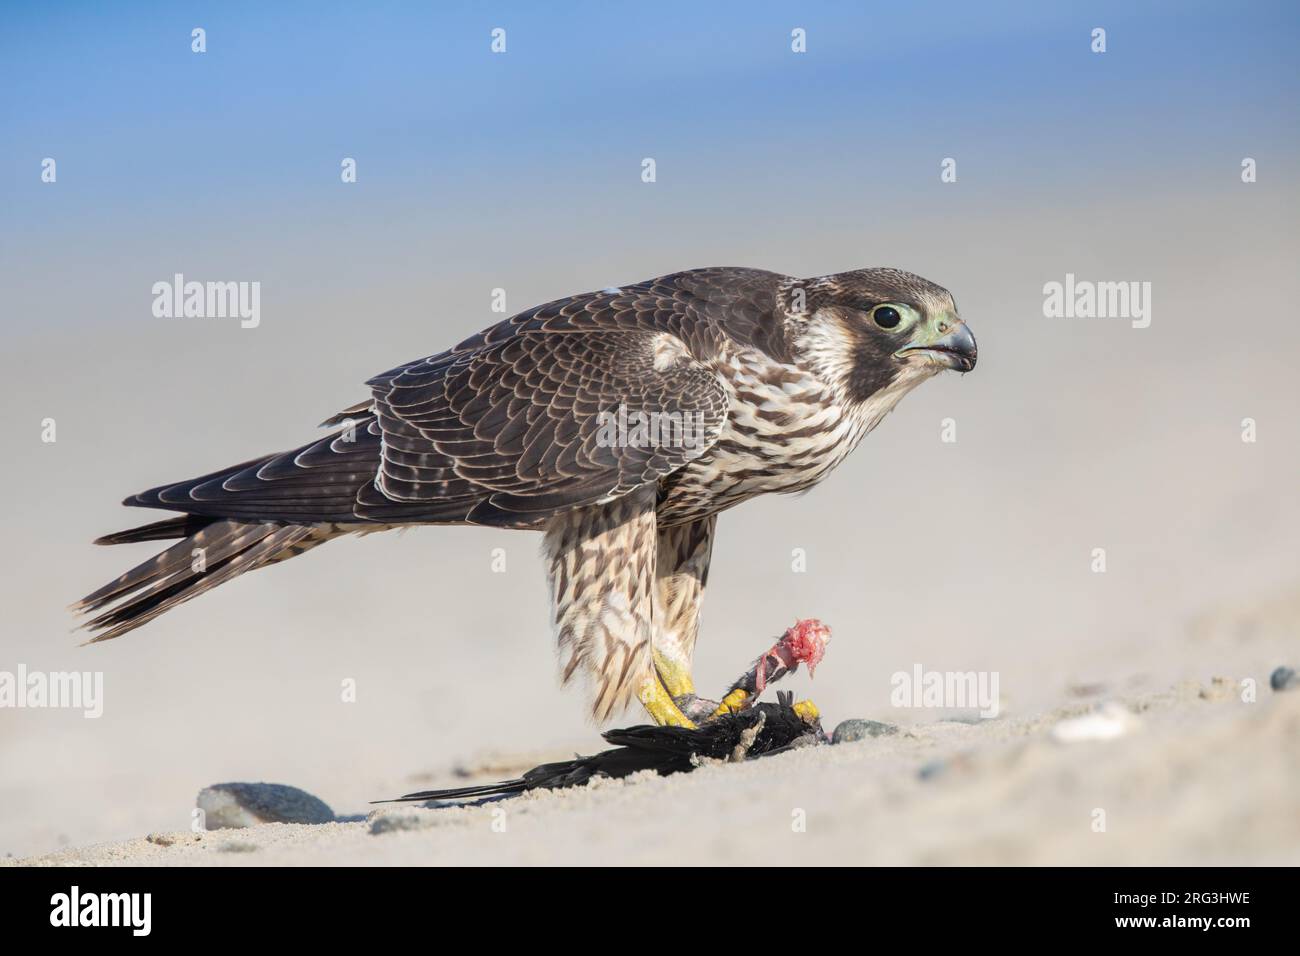 Juvenile Peregrine Falcon (Falco peregrinus) eating its prey (Western Jackdaw) on a beach in Brittany, France. Stock Photo